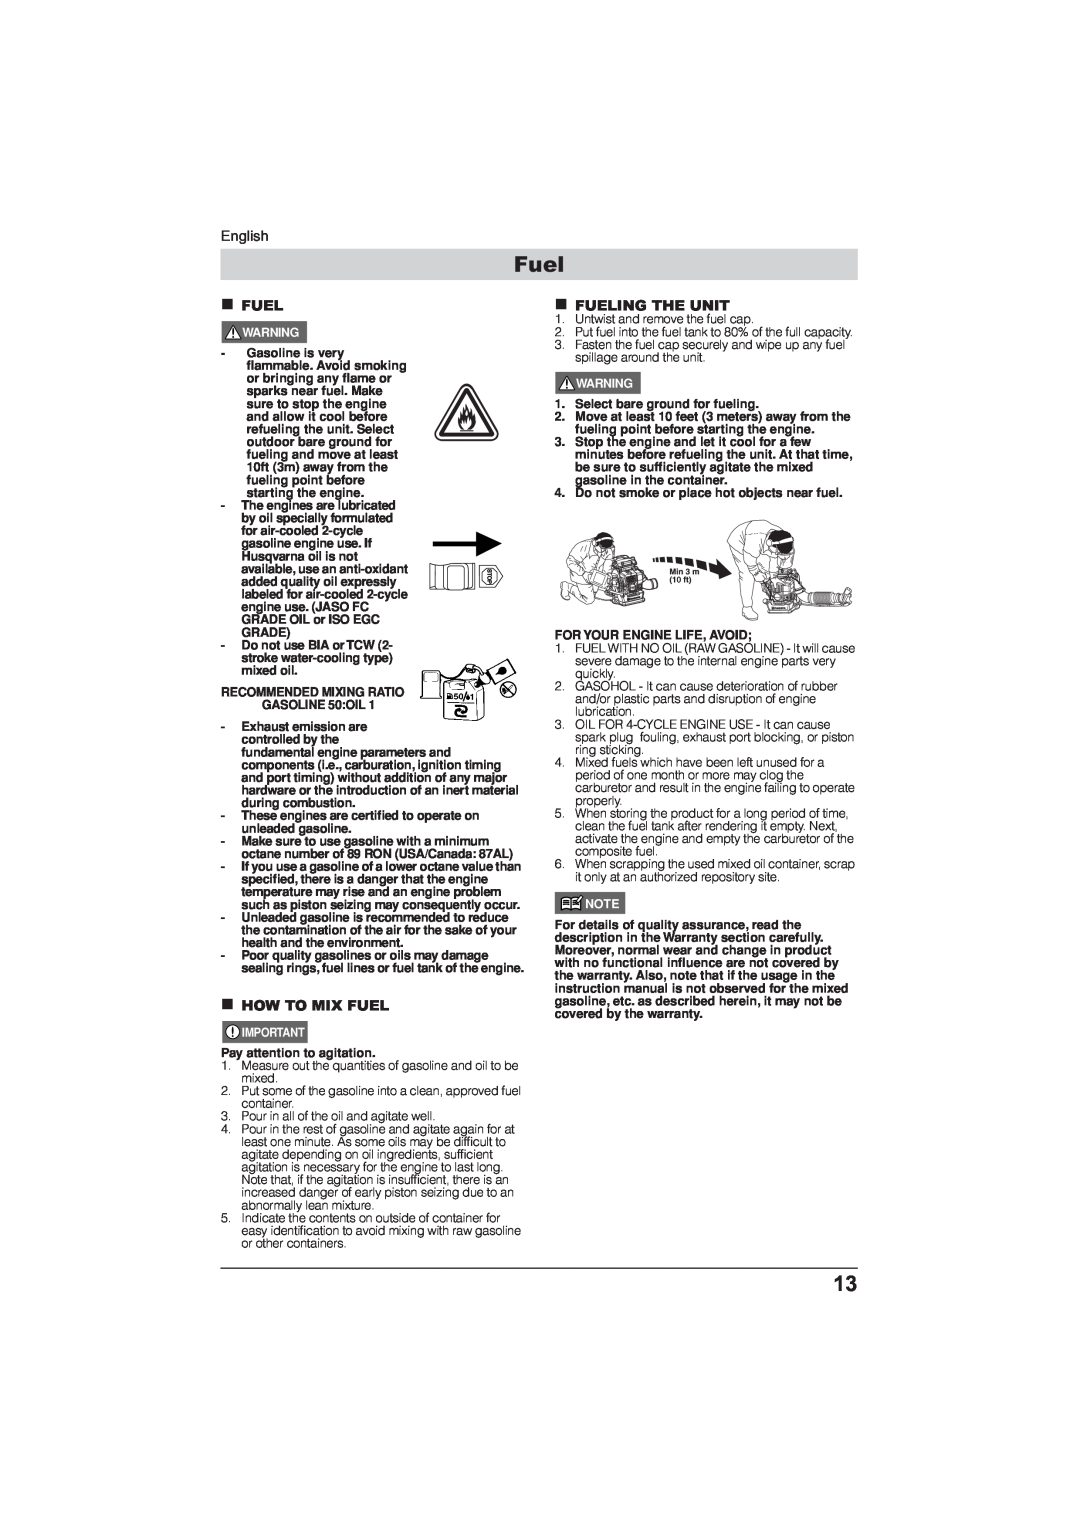 Husqvarna 115 24 05-95 manual English, How To Mix Fuel, Fueling The Unit 